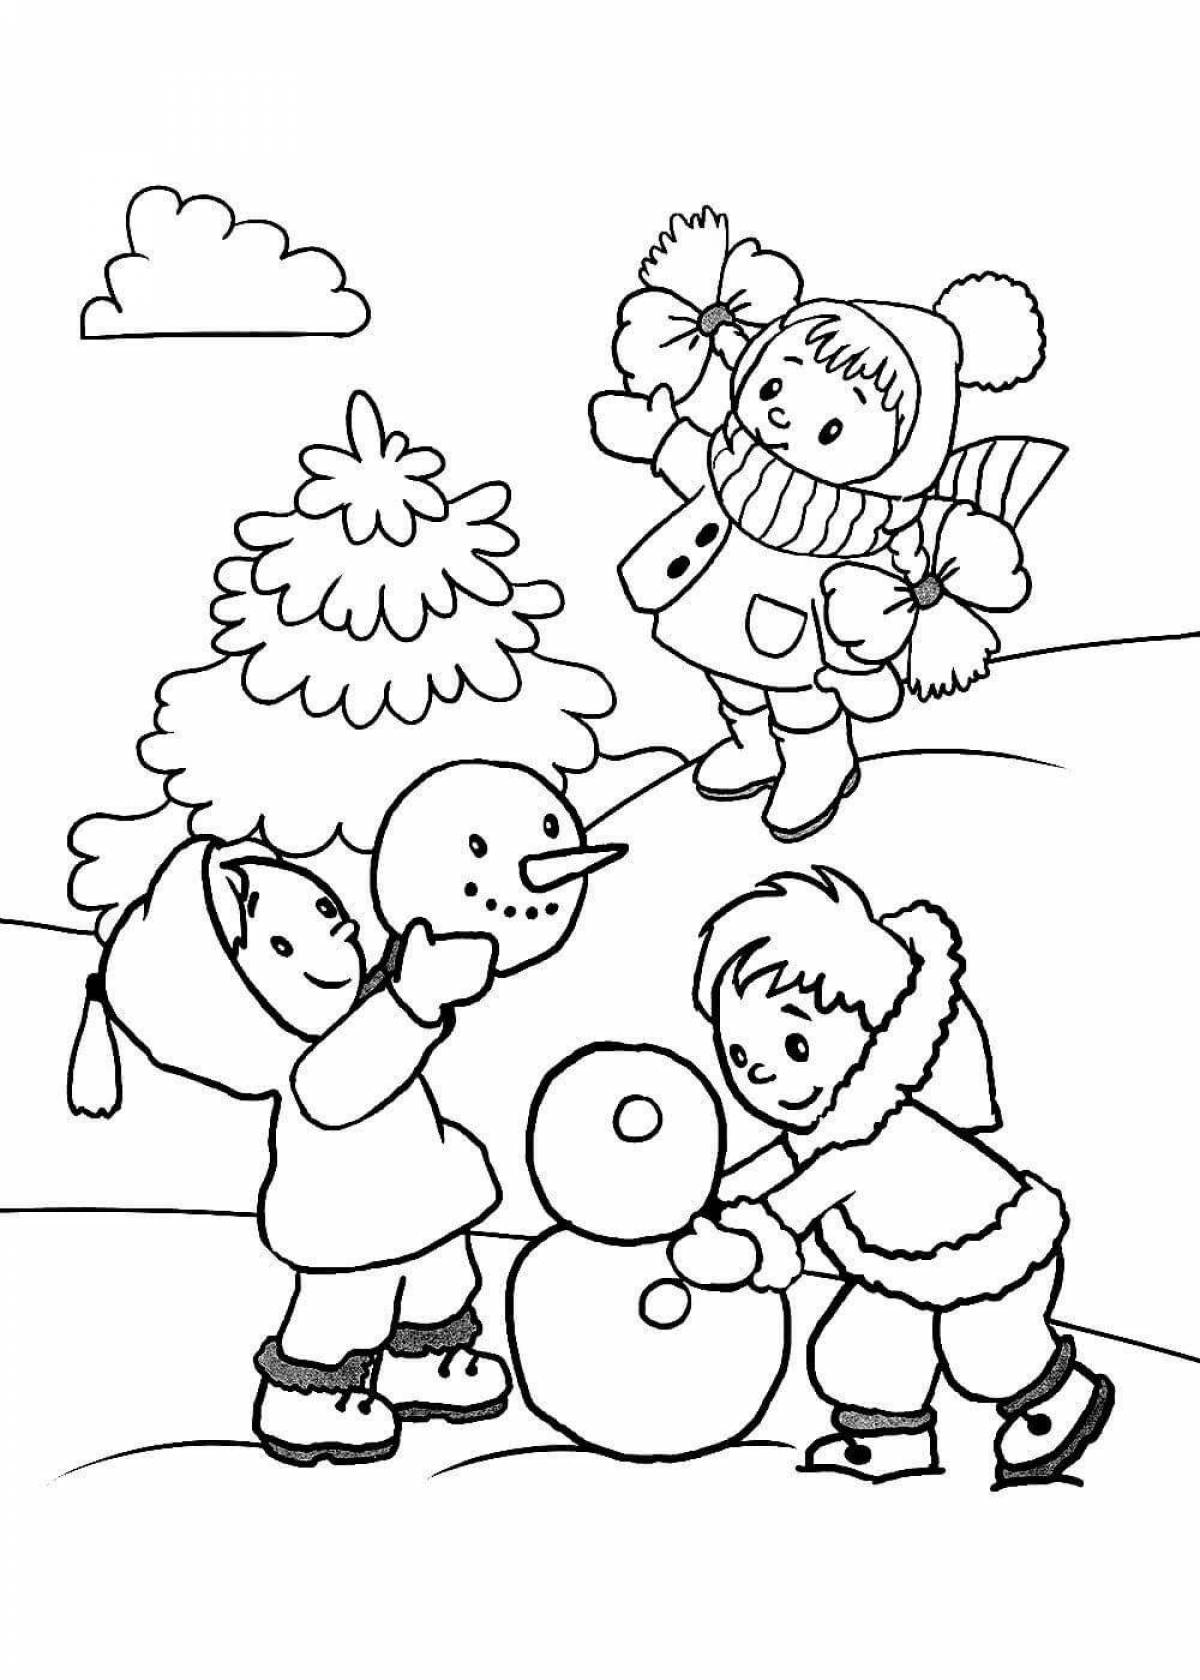 A fun January coloring book for kids